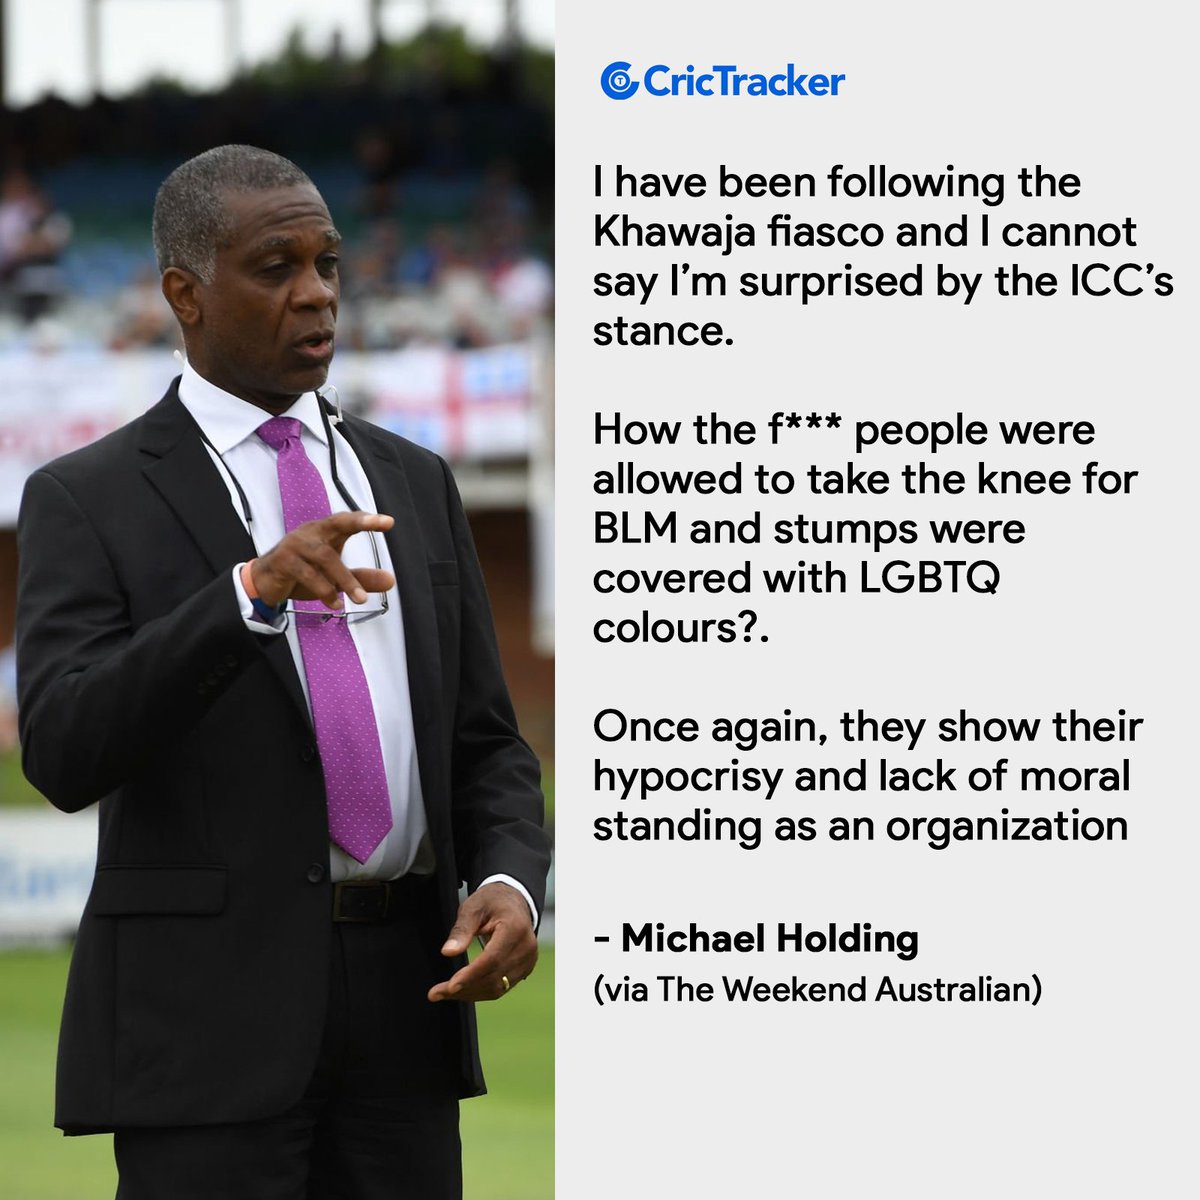 #ICC is as hypocrite as the so called  top media of the West.
Thanks #michaelholding for calling the hypocrisy openly.
Good going @Uz_Khawaja 
#Hypocrites #Hypocrisy #AUSvPAK #PAKvsAUS #CricketAustralia